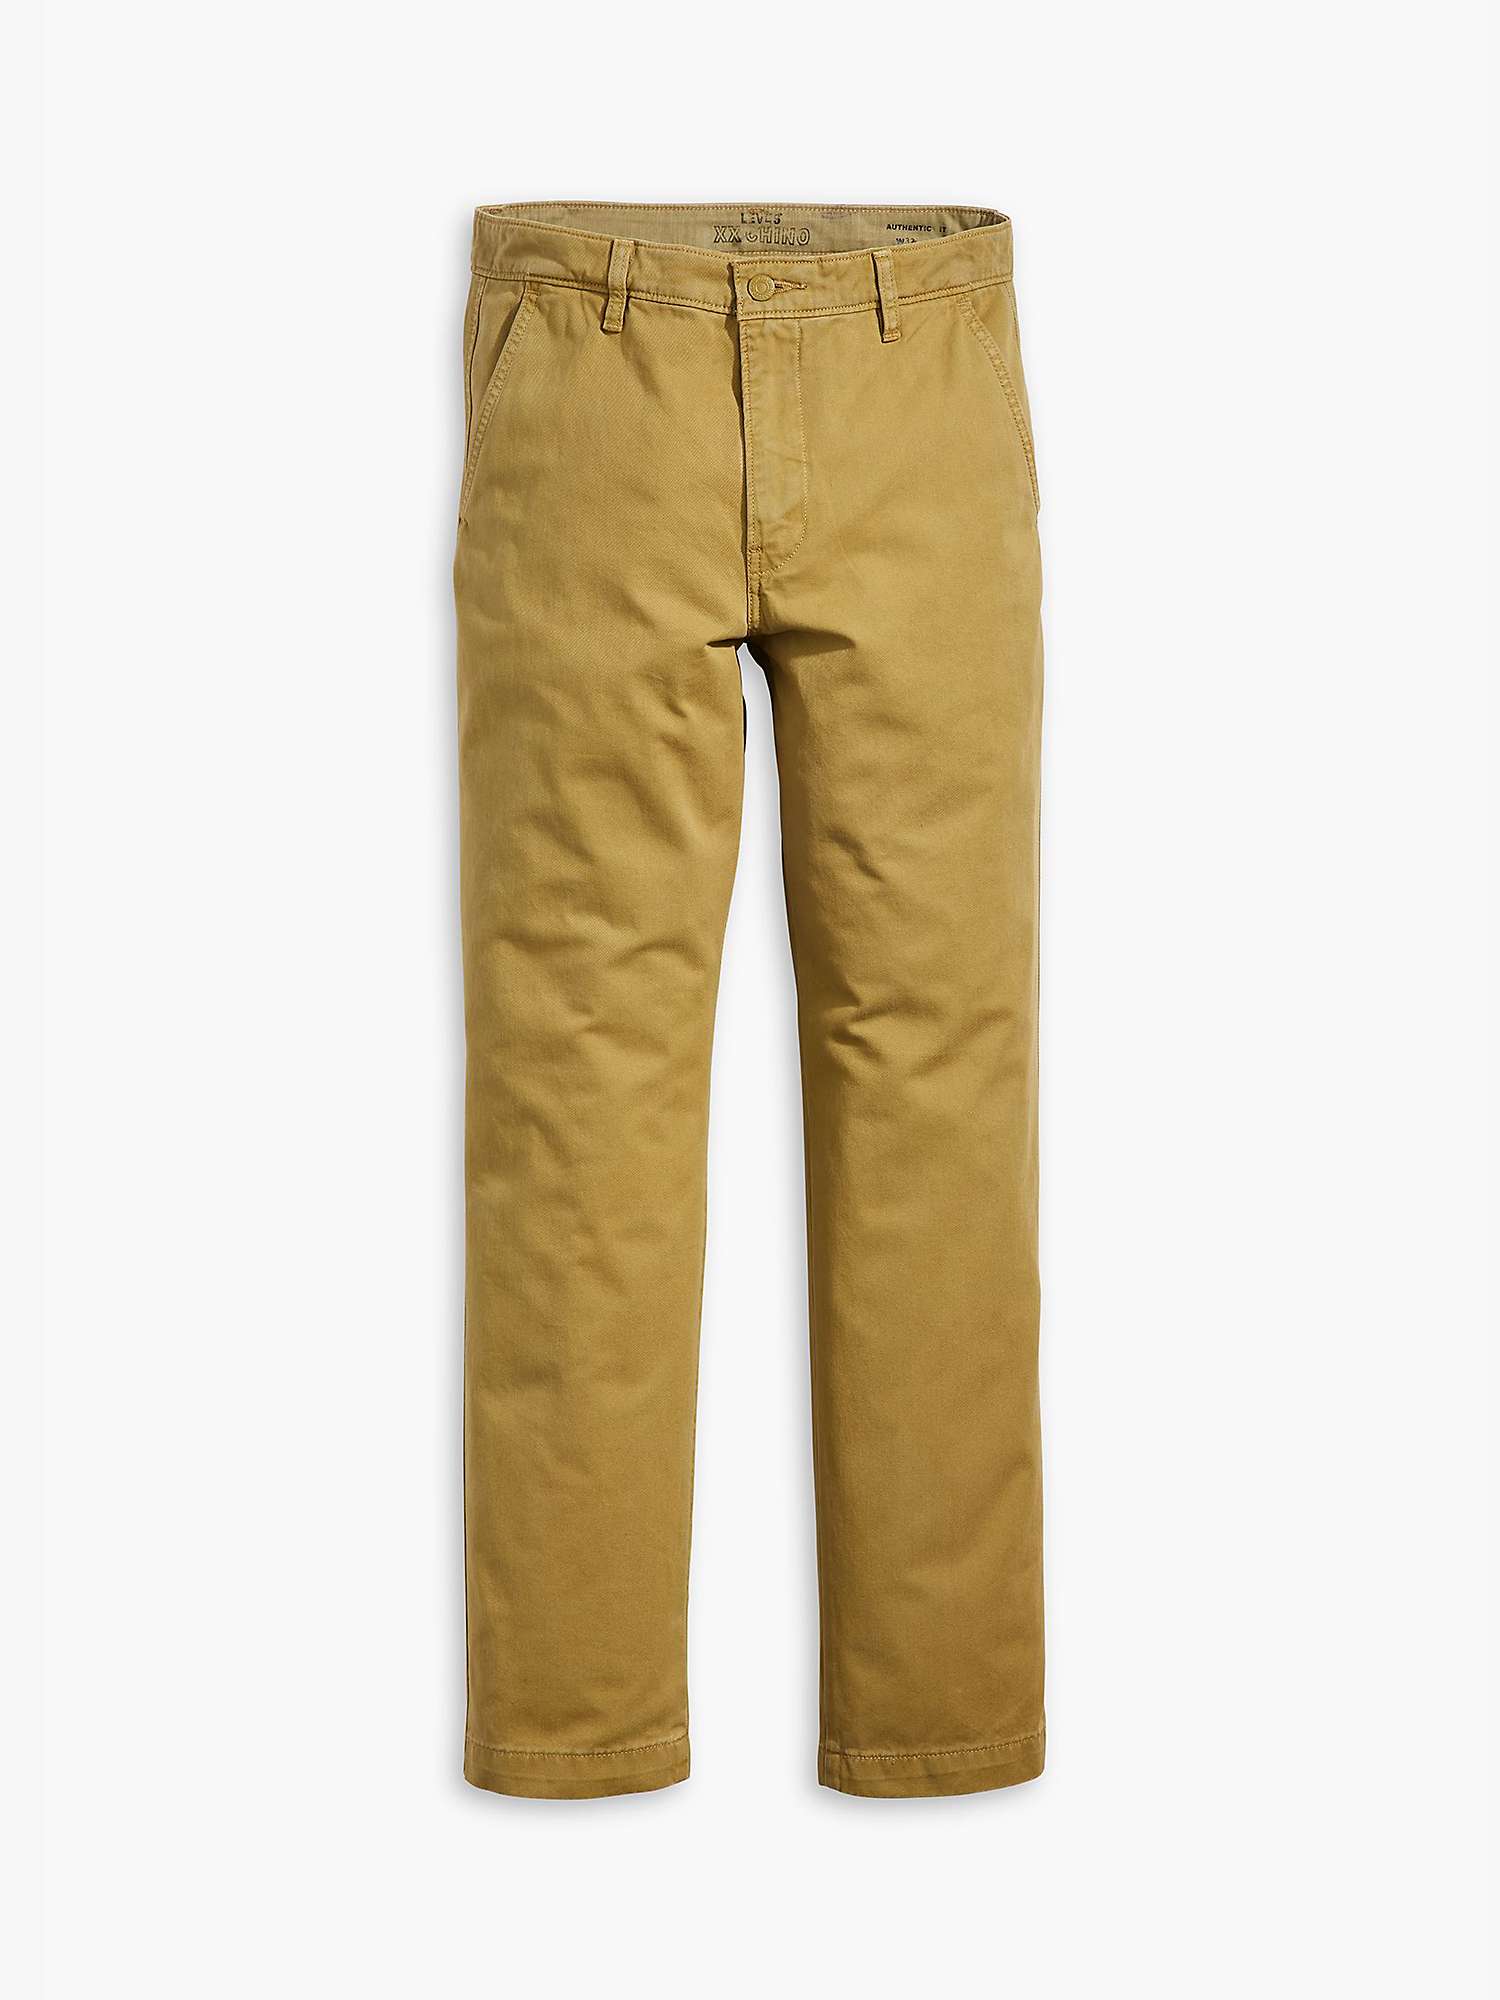 Buy Levi's Chino Authentic Straight Trousers, Khaki Online at johnlewis.com